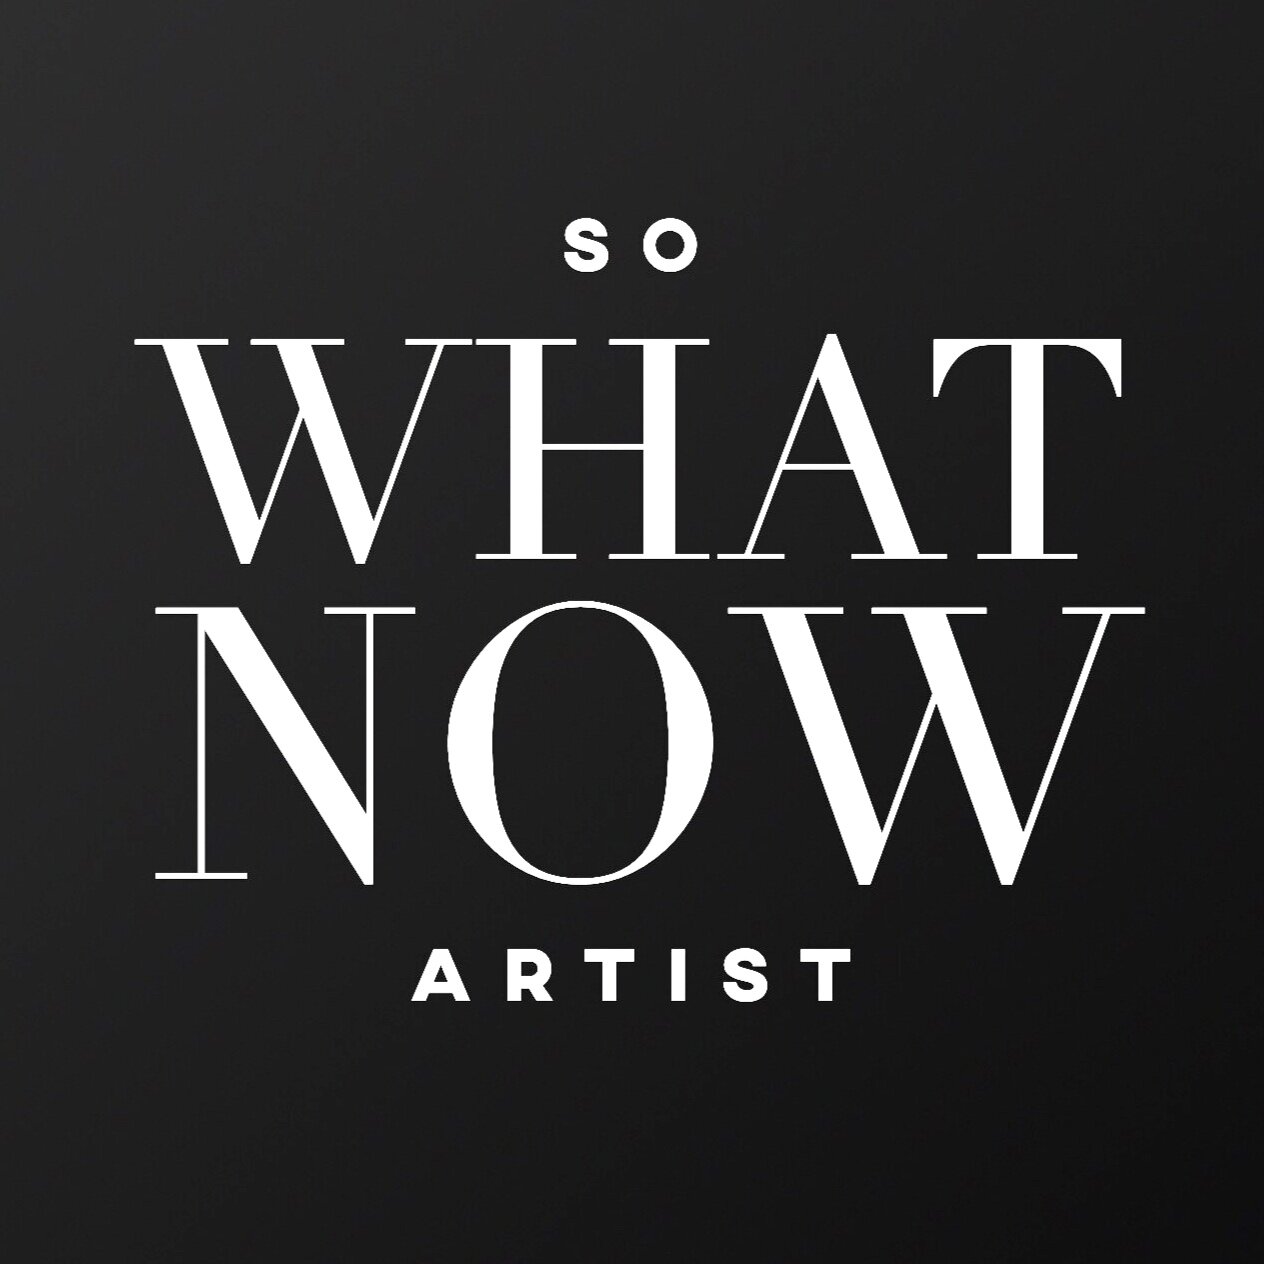 So What Now Artist?